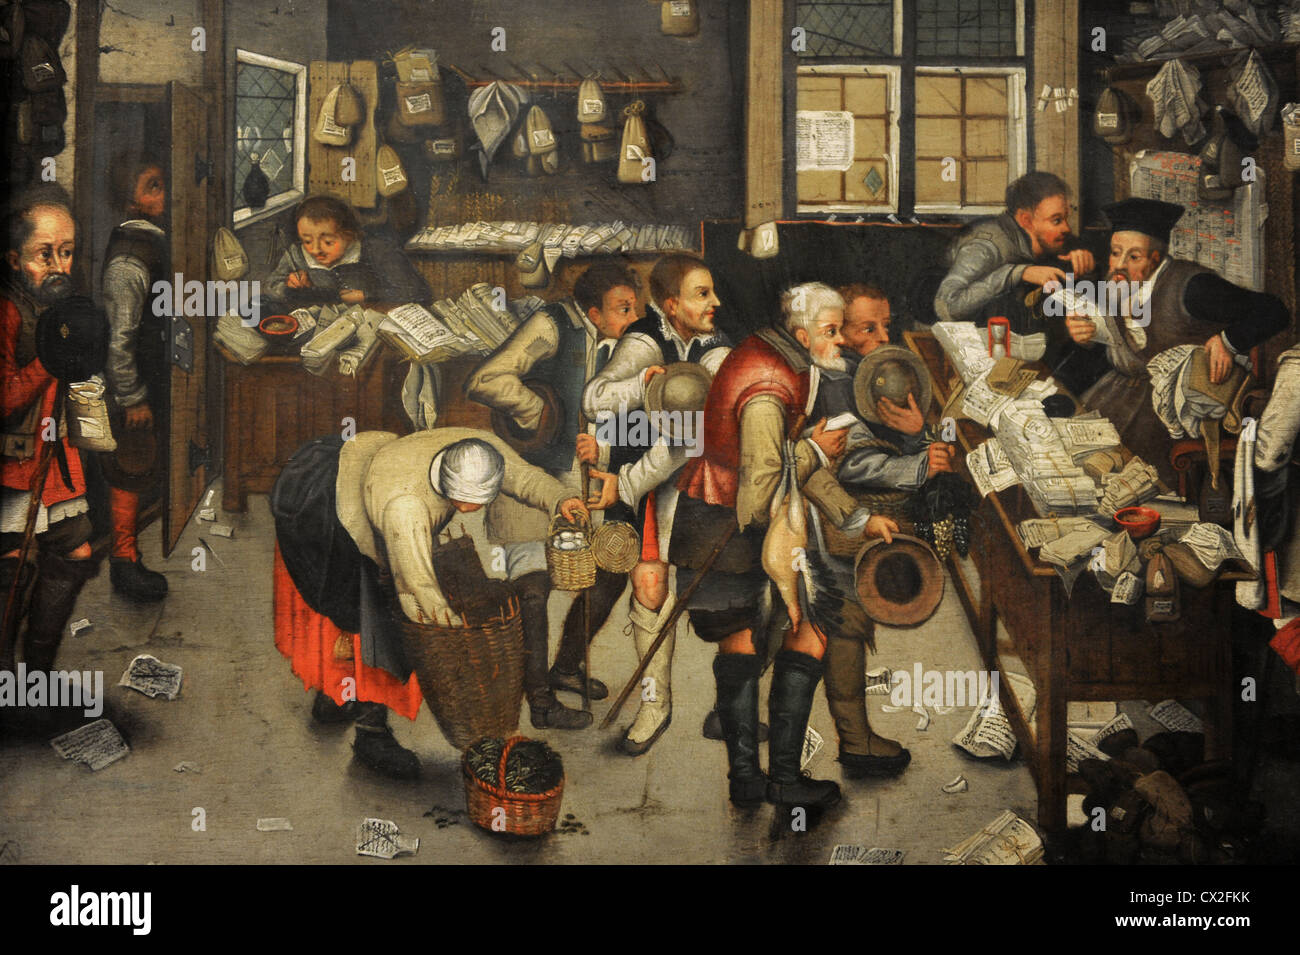 Pieter Brueghel the Younger (1564-1636). Flemish painter. The Collector's Office, after 1615. Stock Photo